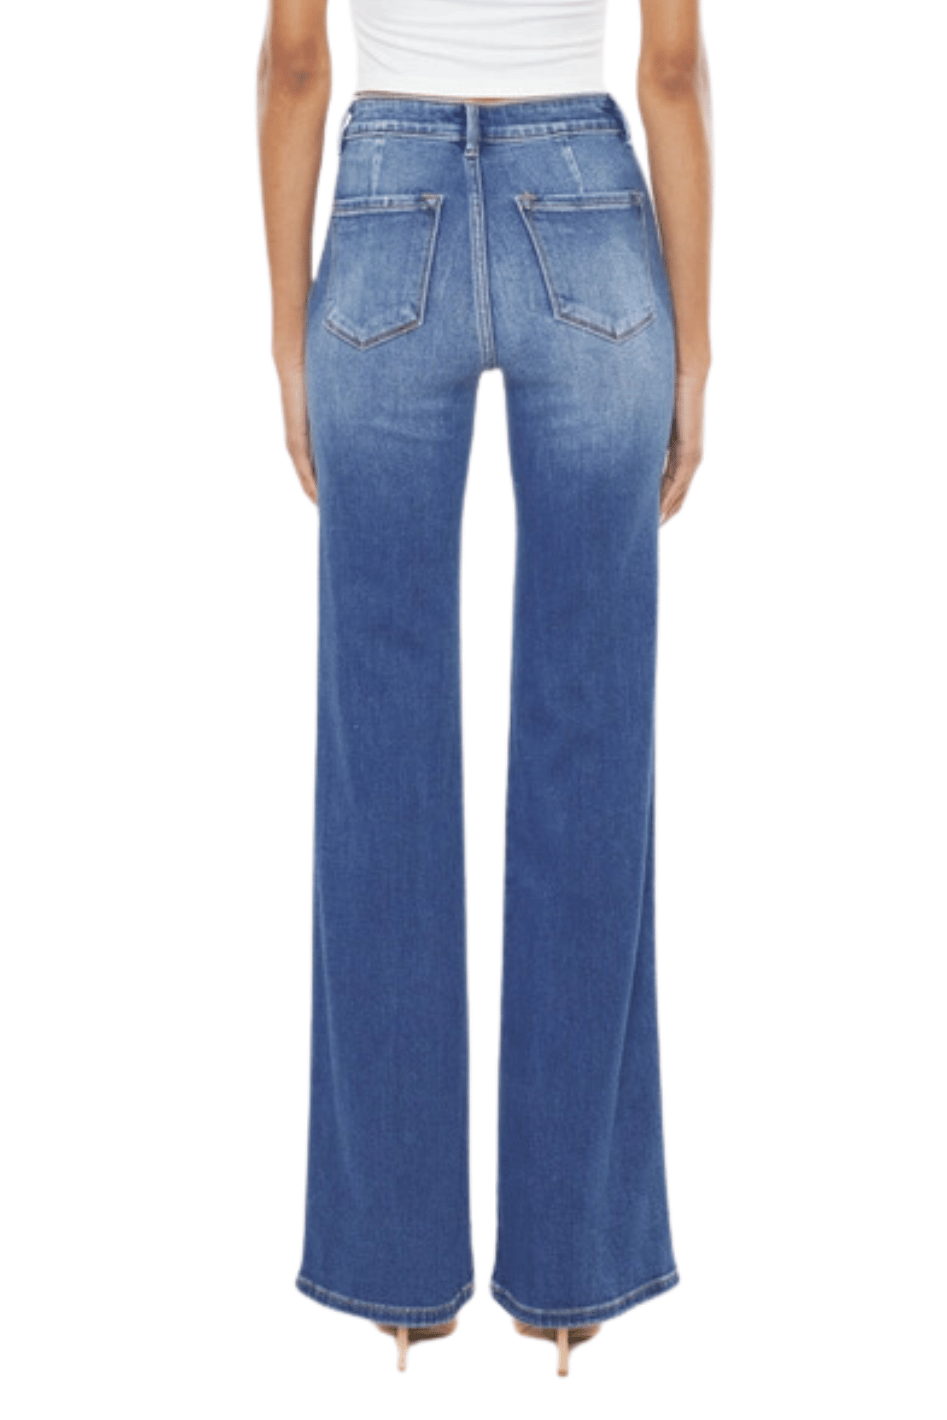 Celia Ultra High Rise Wide Flare Jeans - Expressive Collective CO.